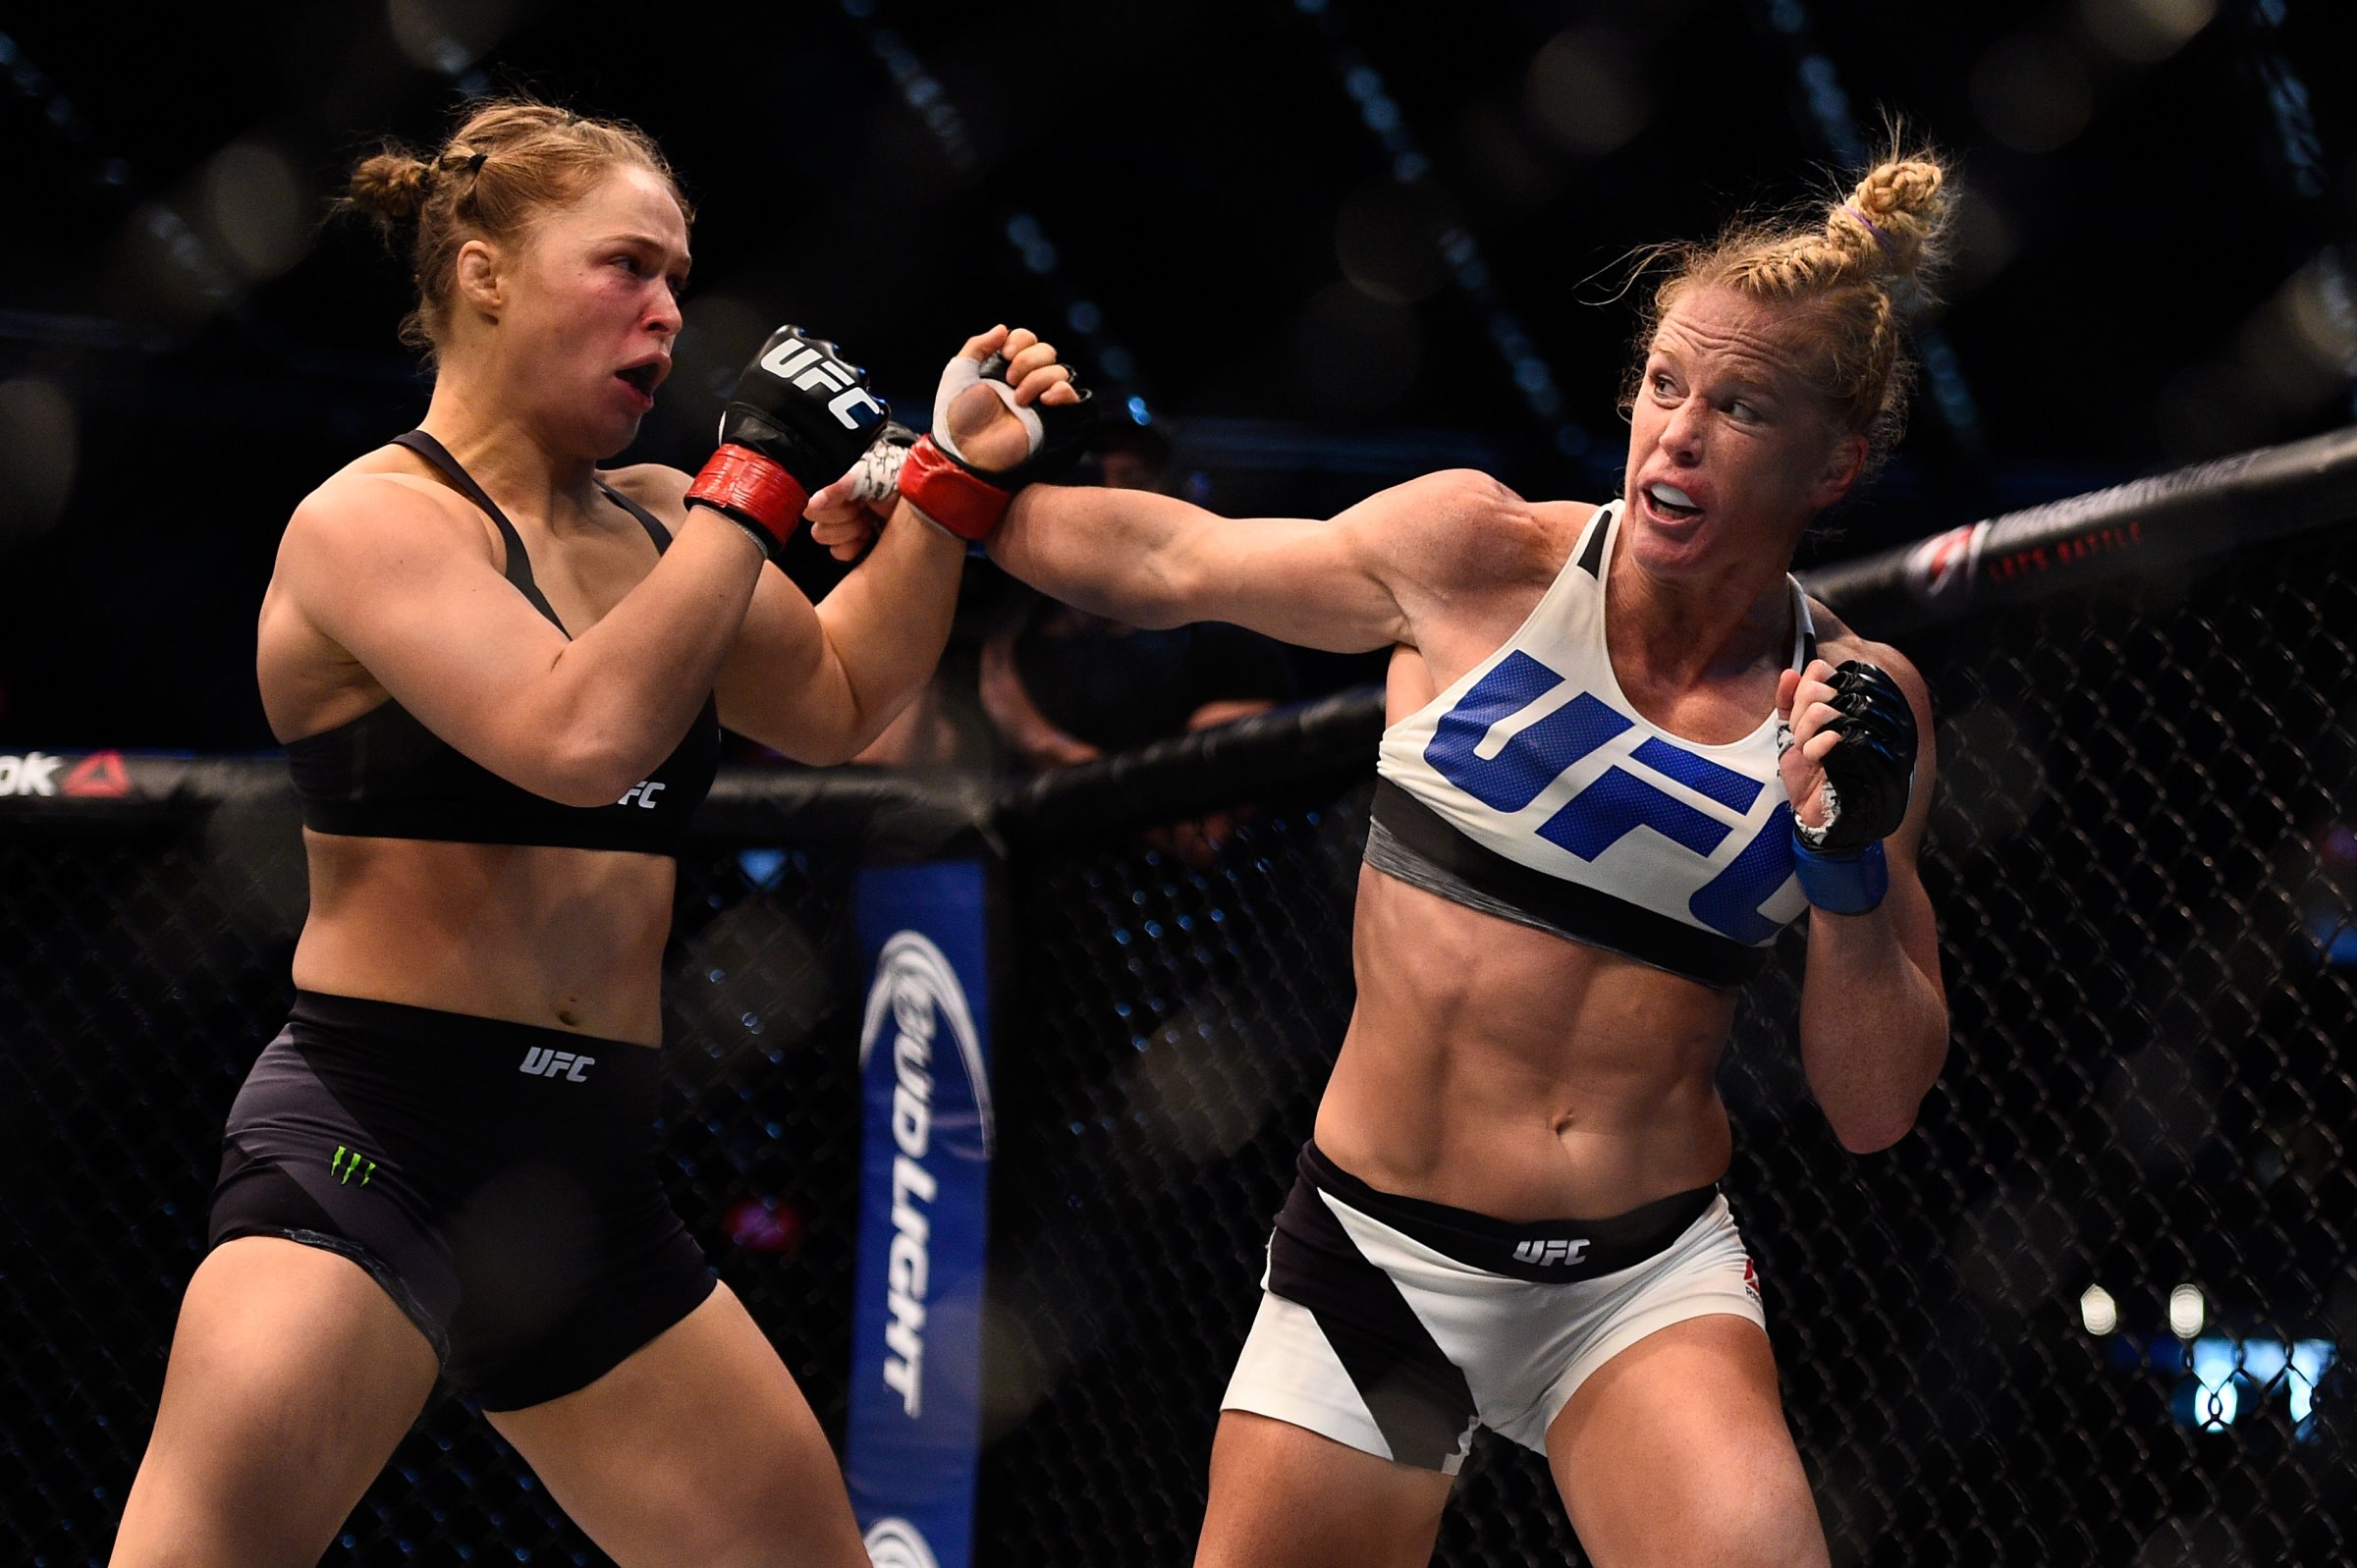 Ronda Rousey blocks a punch from Holly Holm in their UFC women's bantamweight championship bout during the UFC 193 event at Etihad Stadium on November 15, 2015 in Melbourne, Australia.